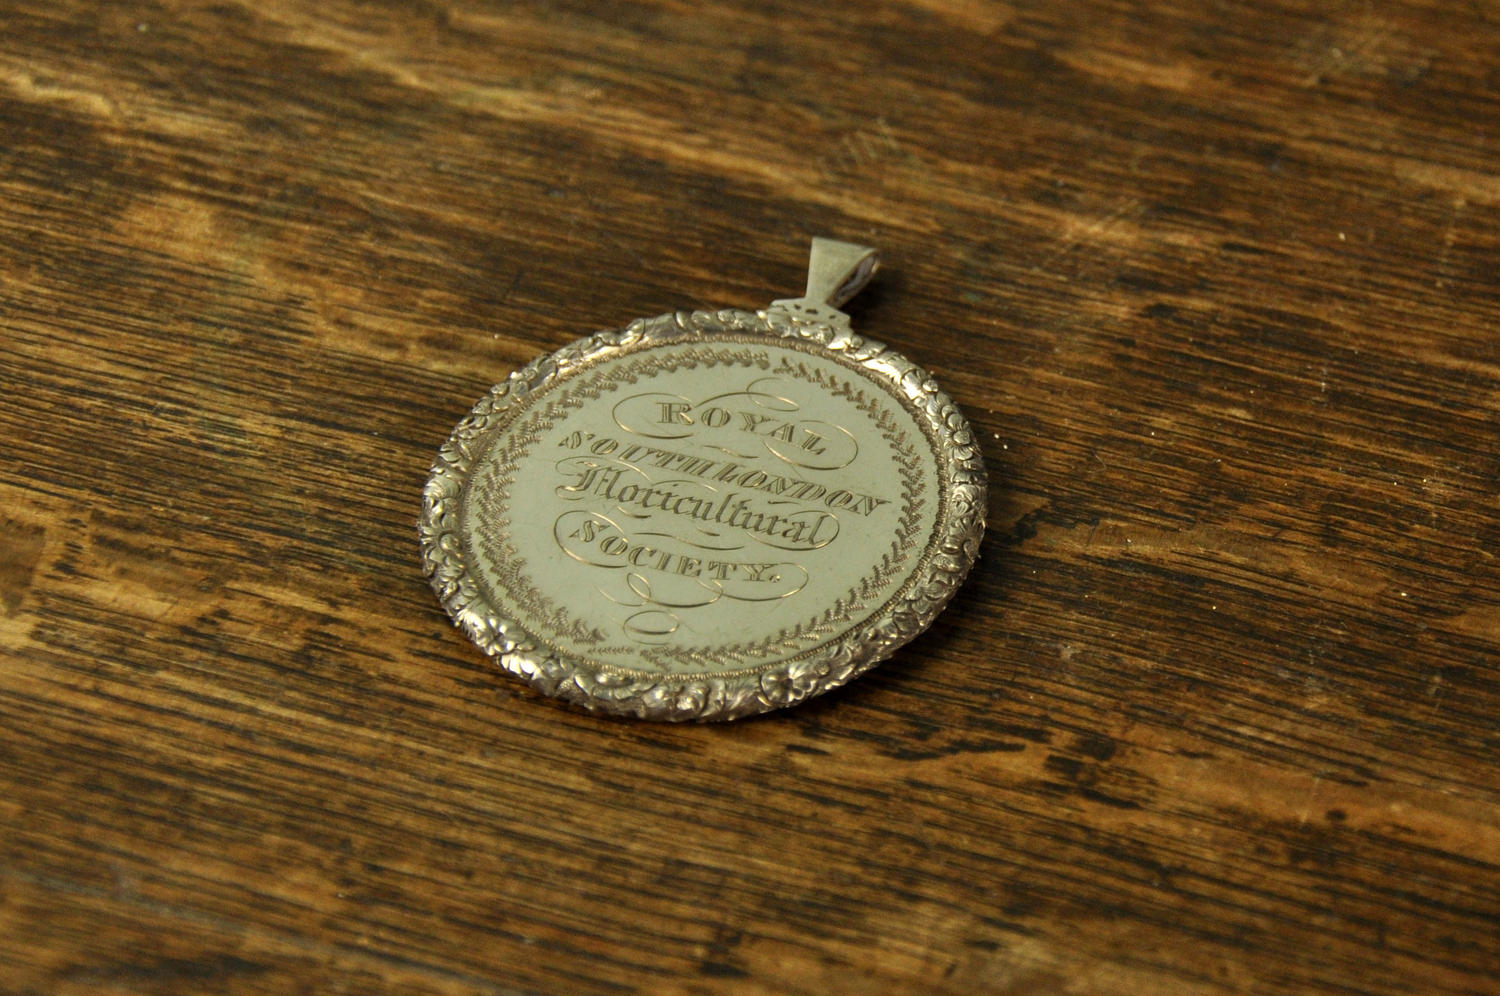 19th century Horticultural medal